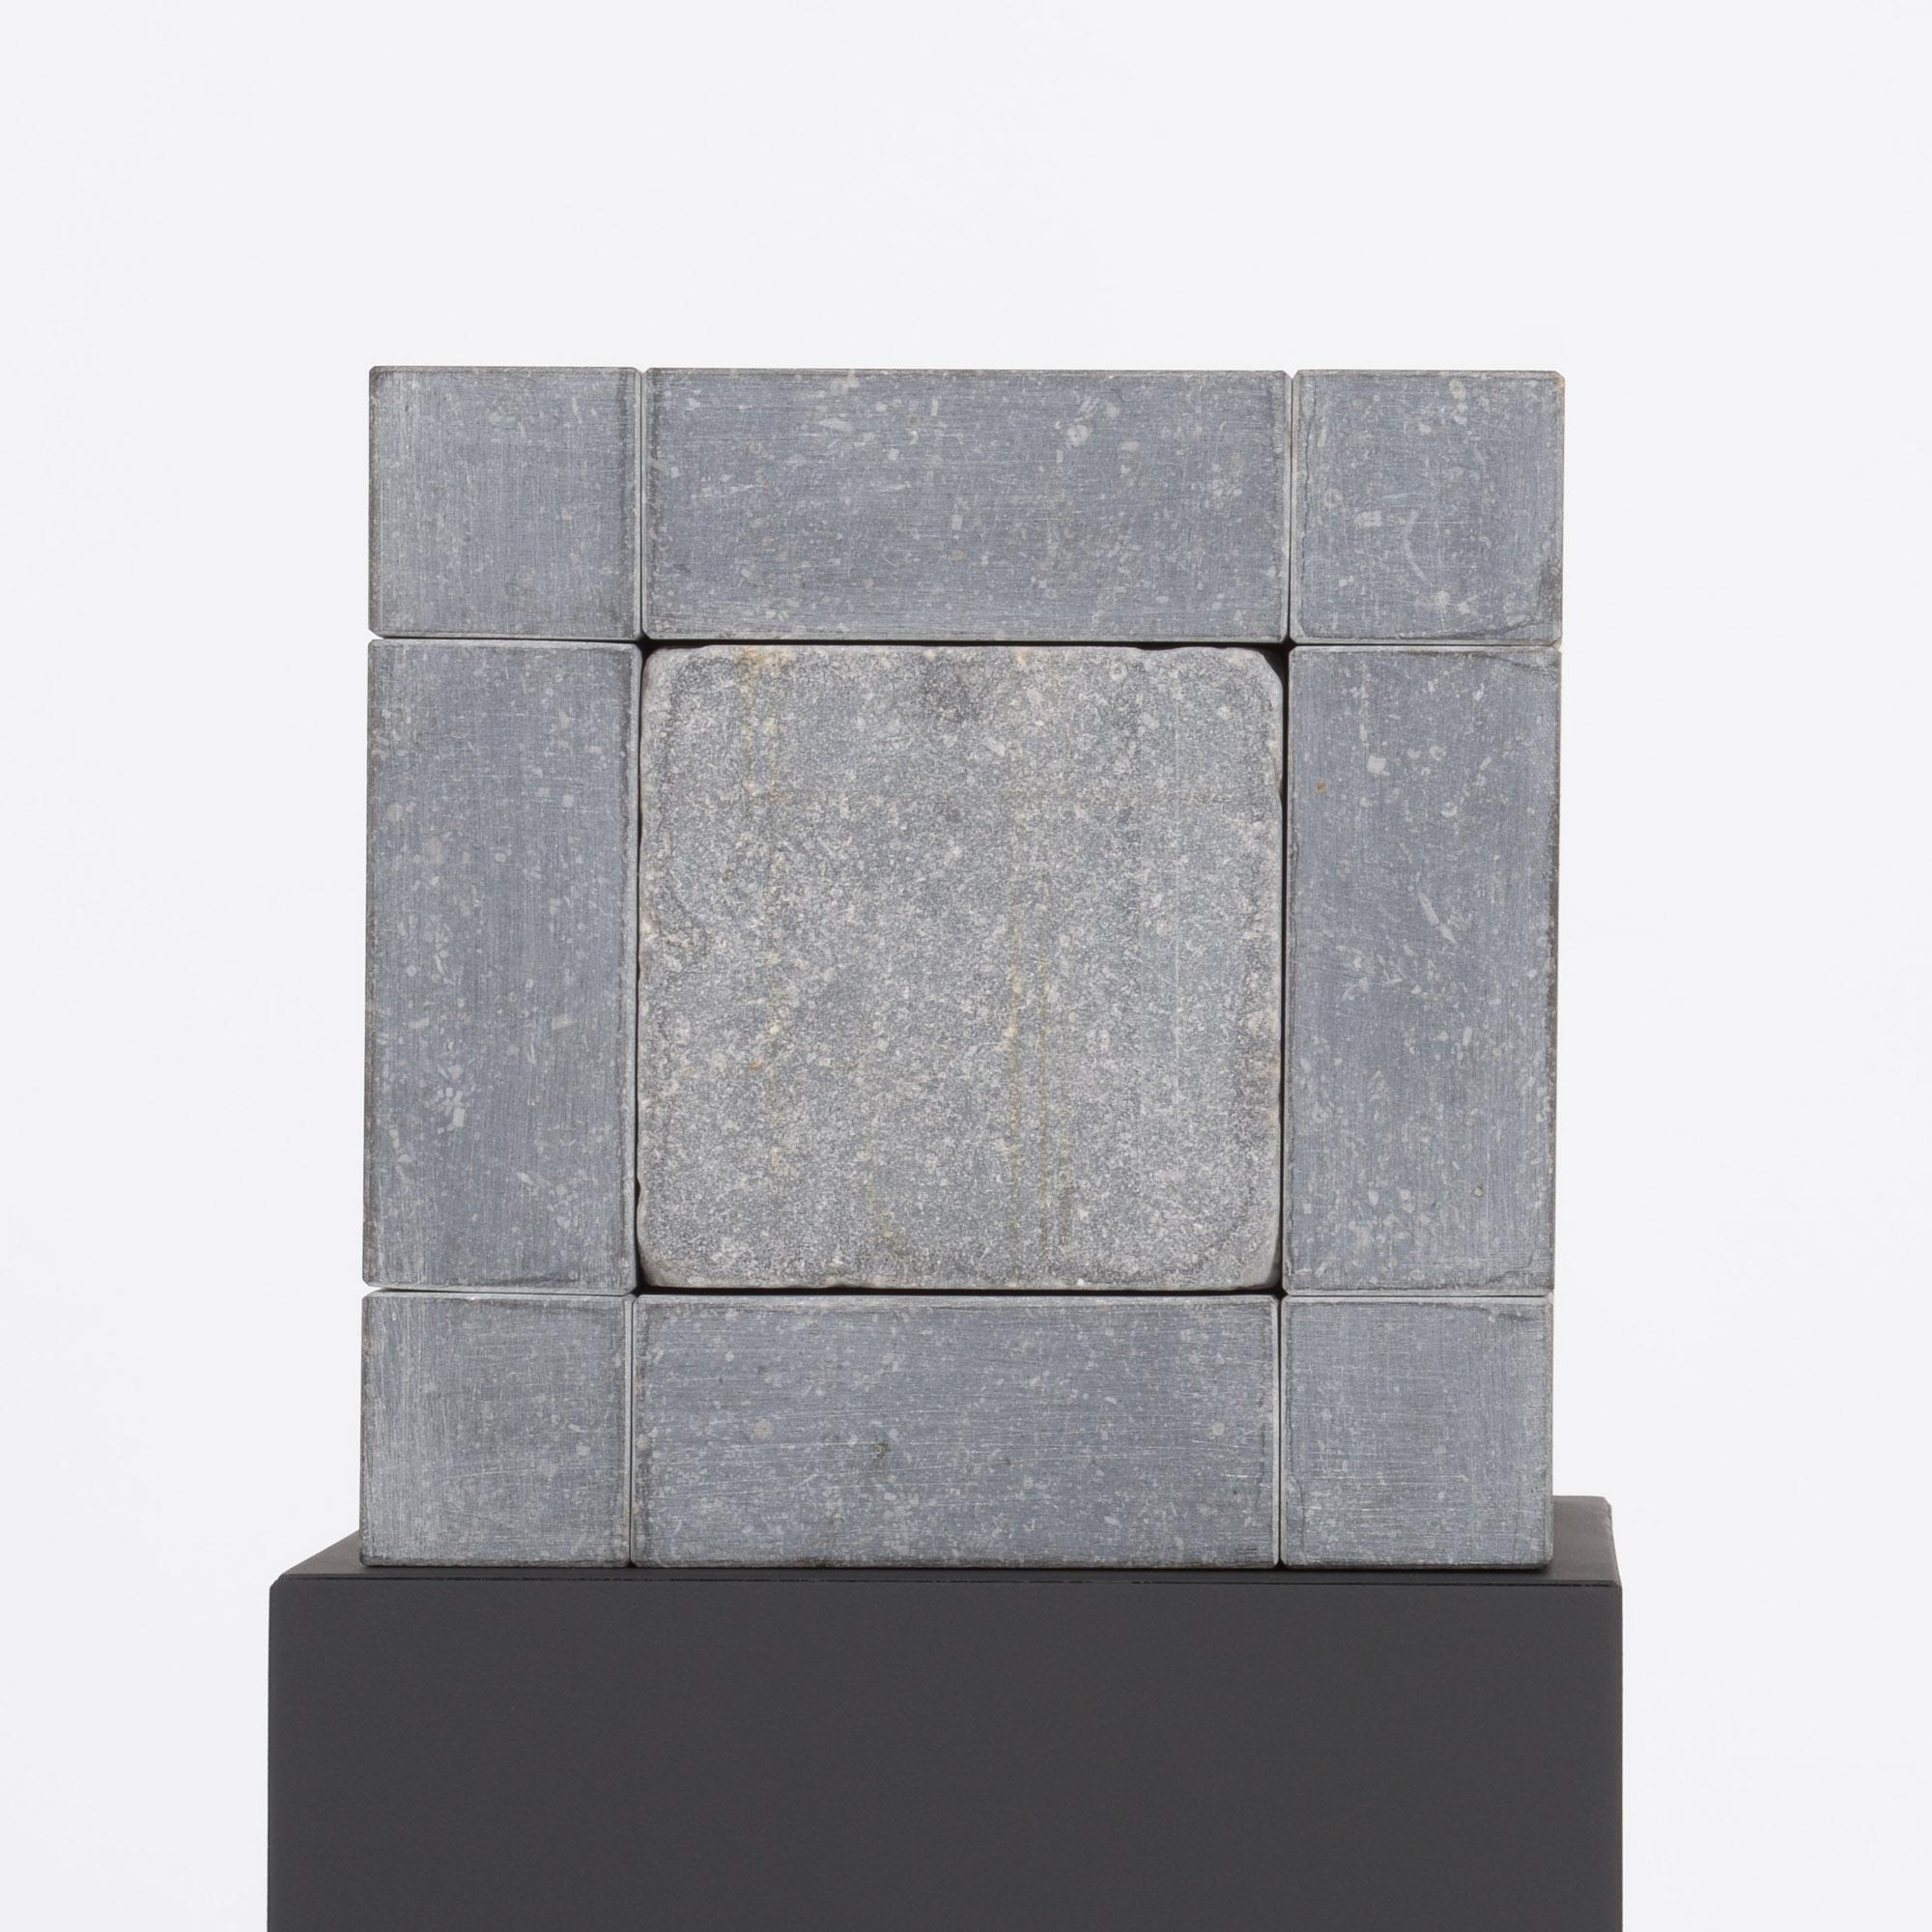 Belgian Abstract Cube Sculptures by Jef Mouton